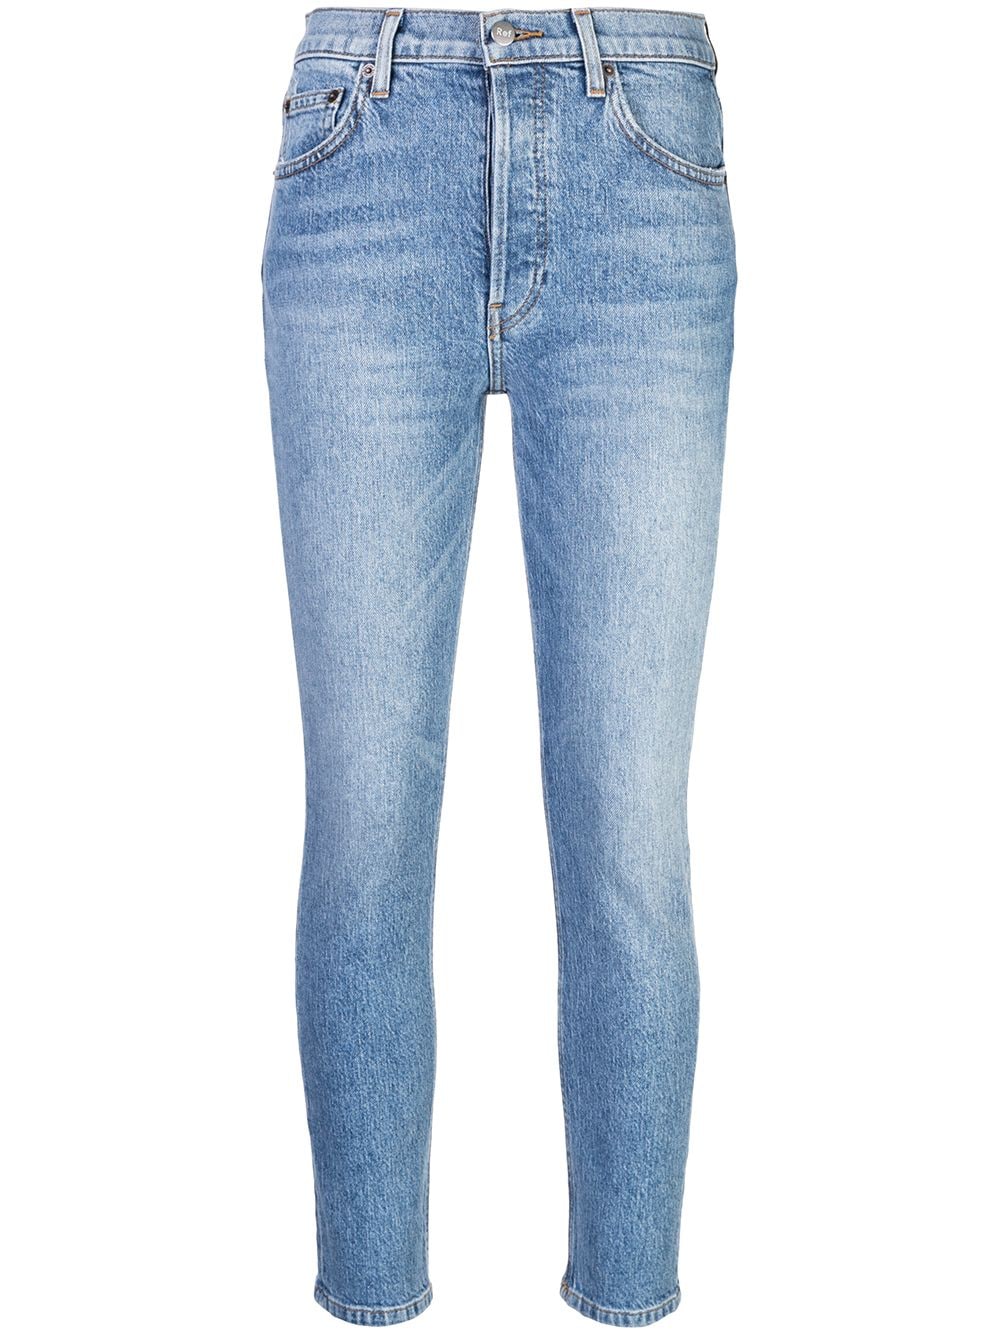 Reformation - Serena Skinny Cropped Jeans | ABOUT ICONS